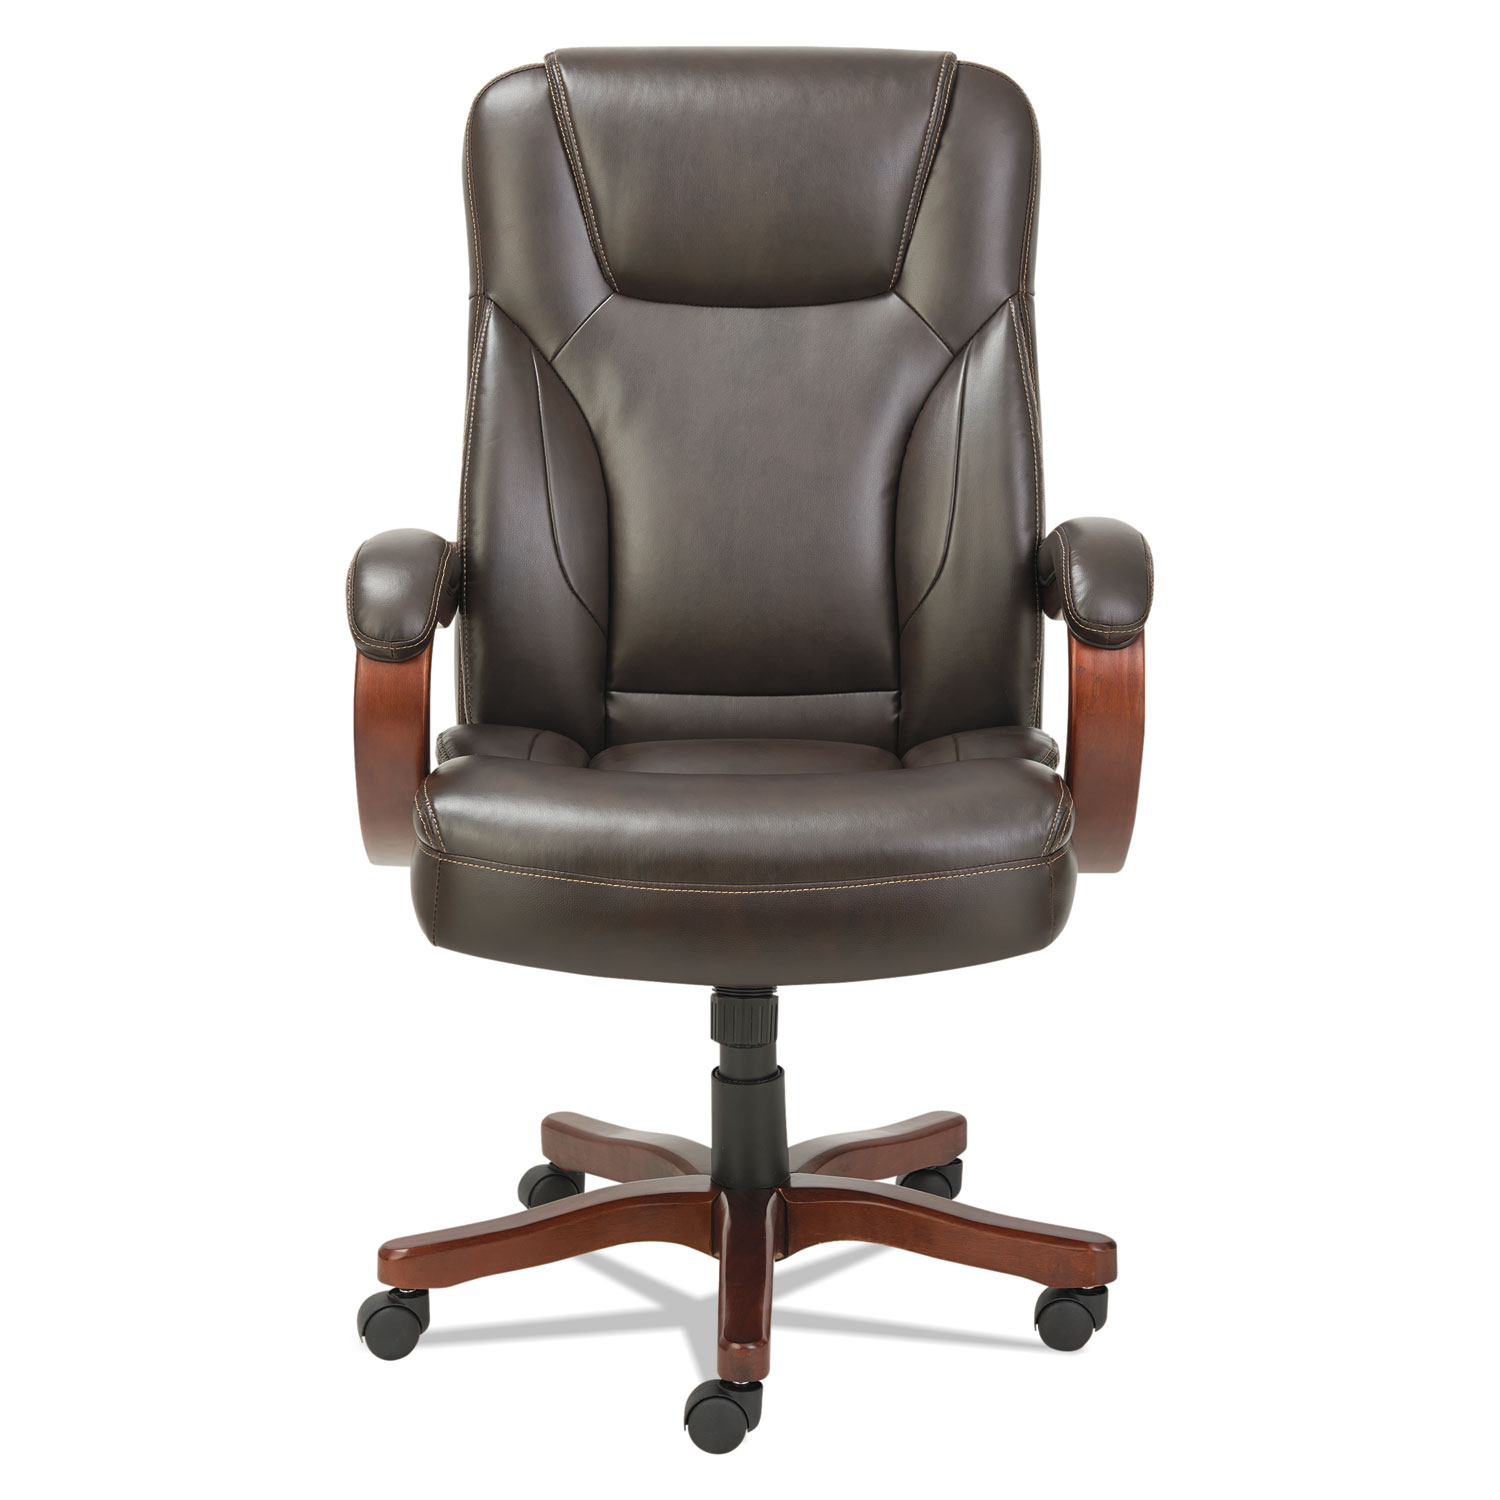 Transitional Series Executive Wood Chair, Chocolate Marble